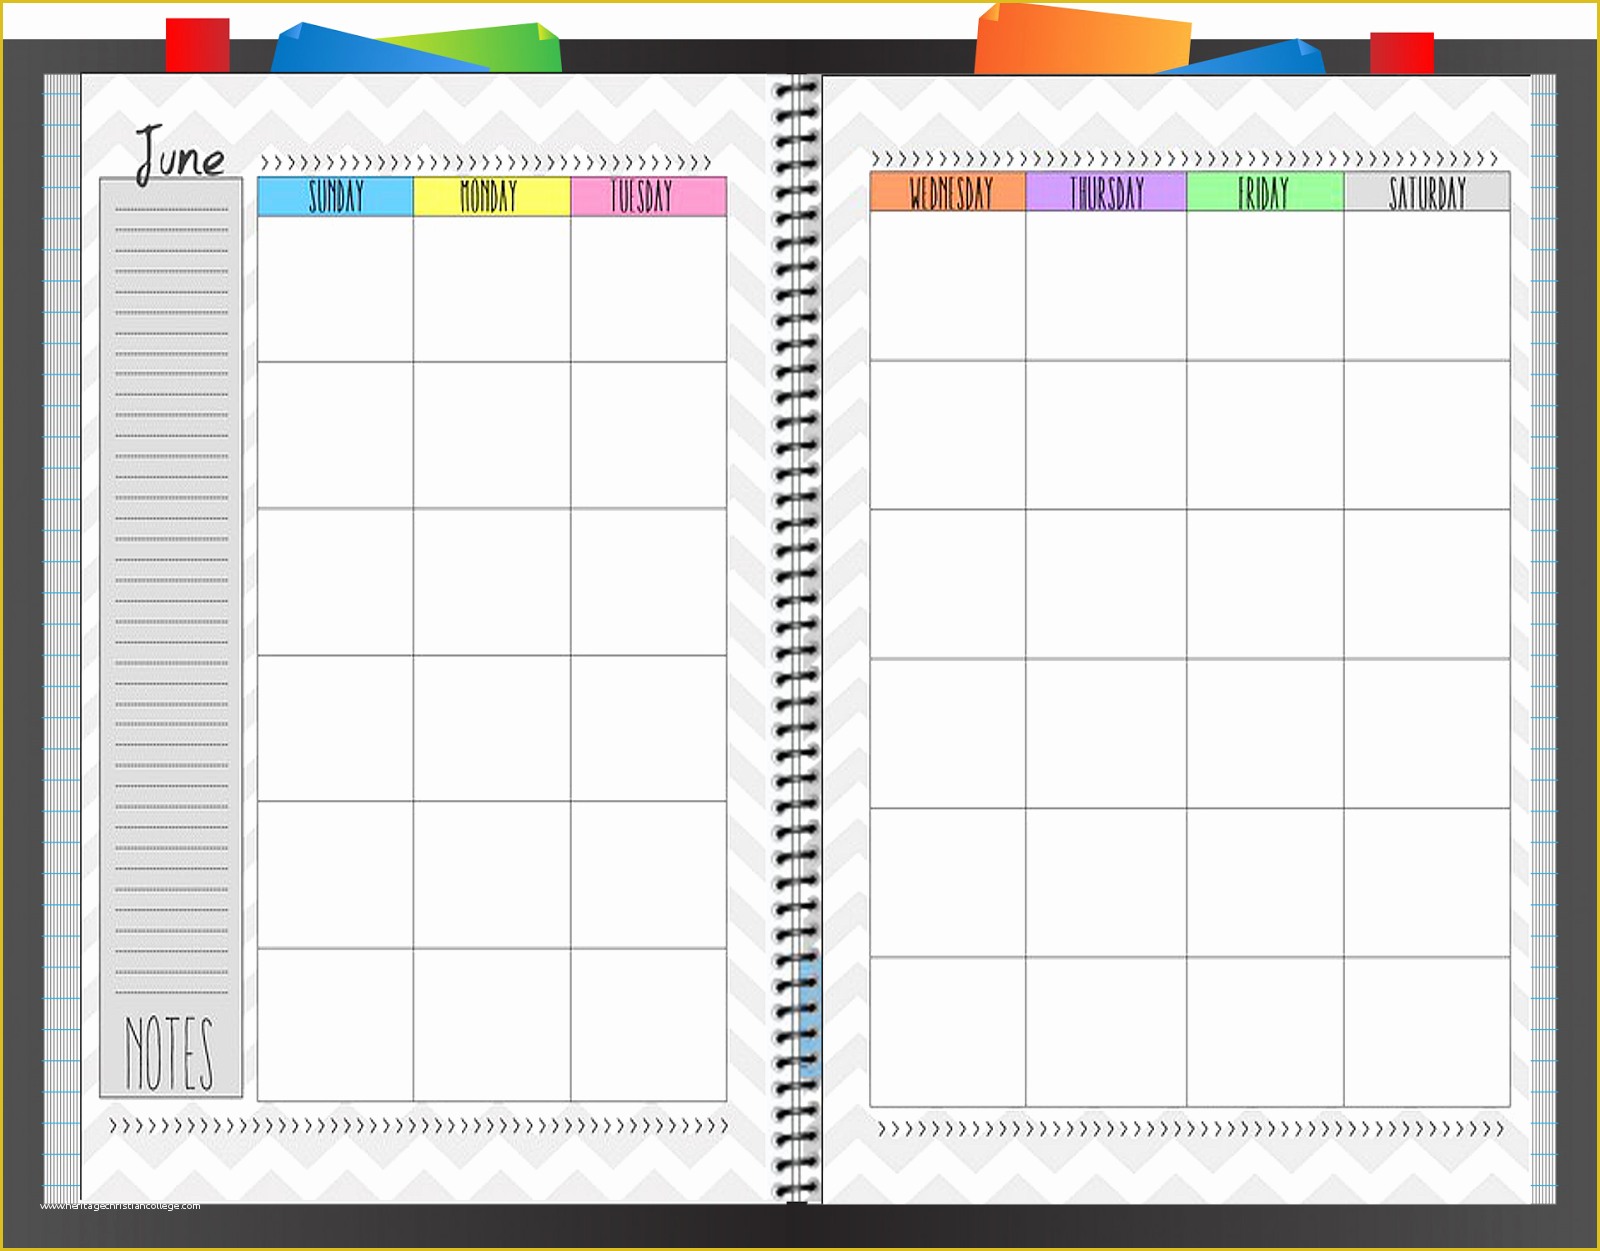 Free Budget Planner Template Of Monthly Financial Planning Finance Spreadshee Free Bud